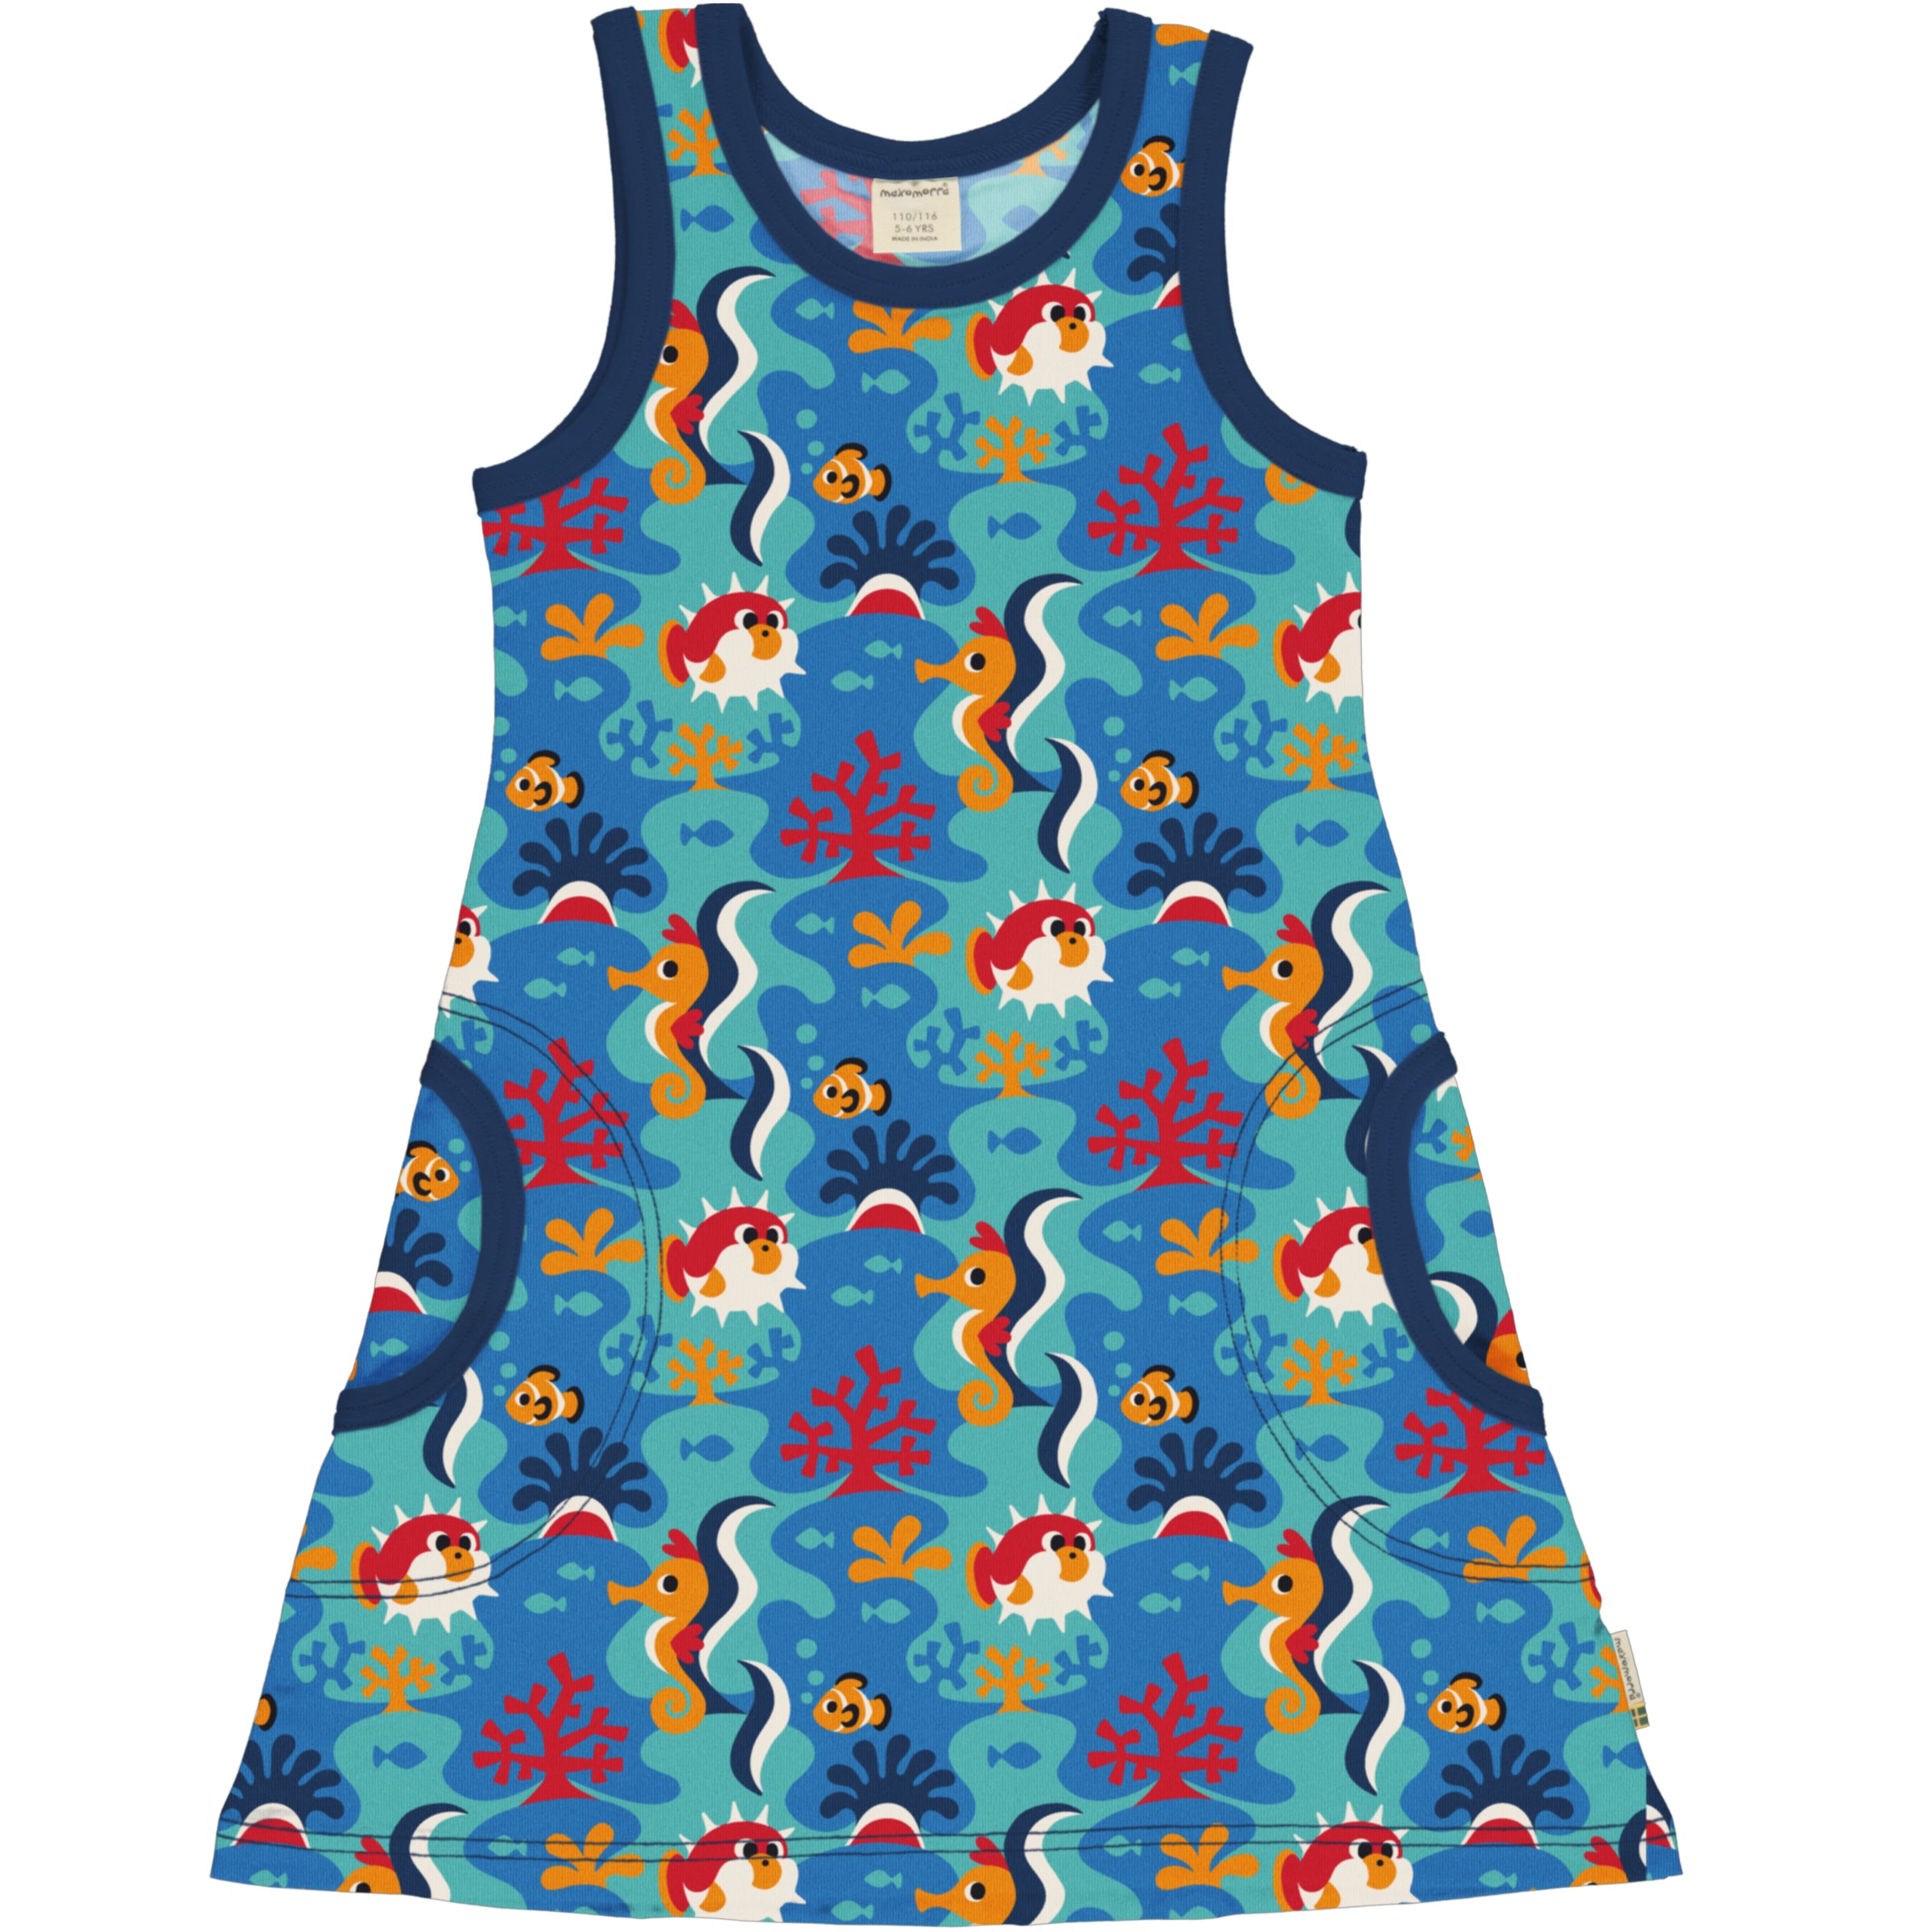 Children's Coral Reef Dress - Maxomorra (Last Available)